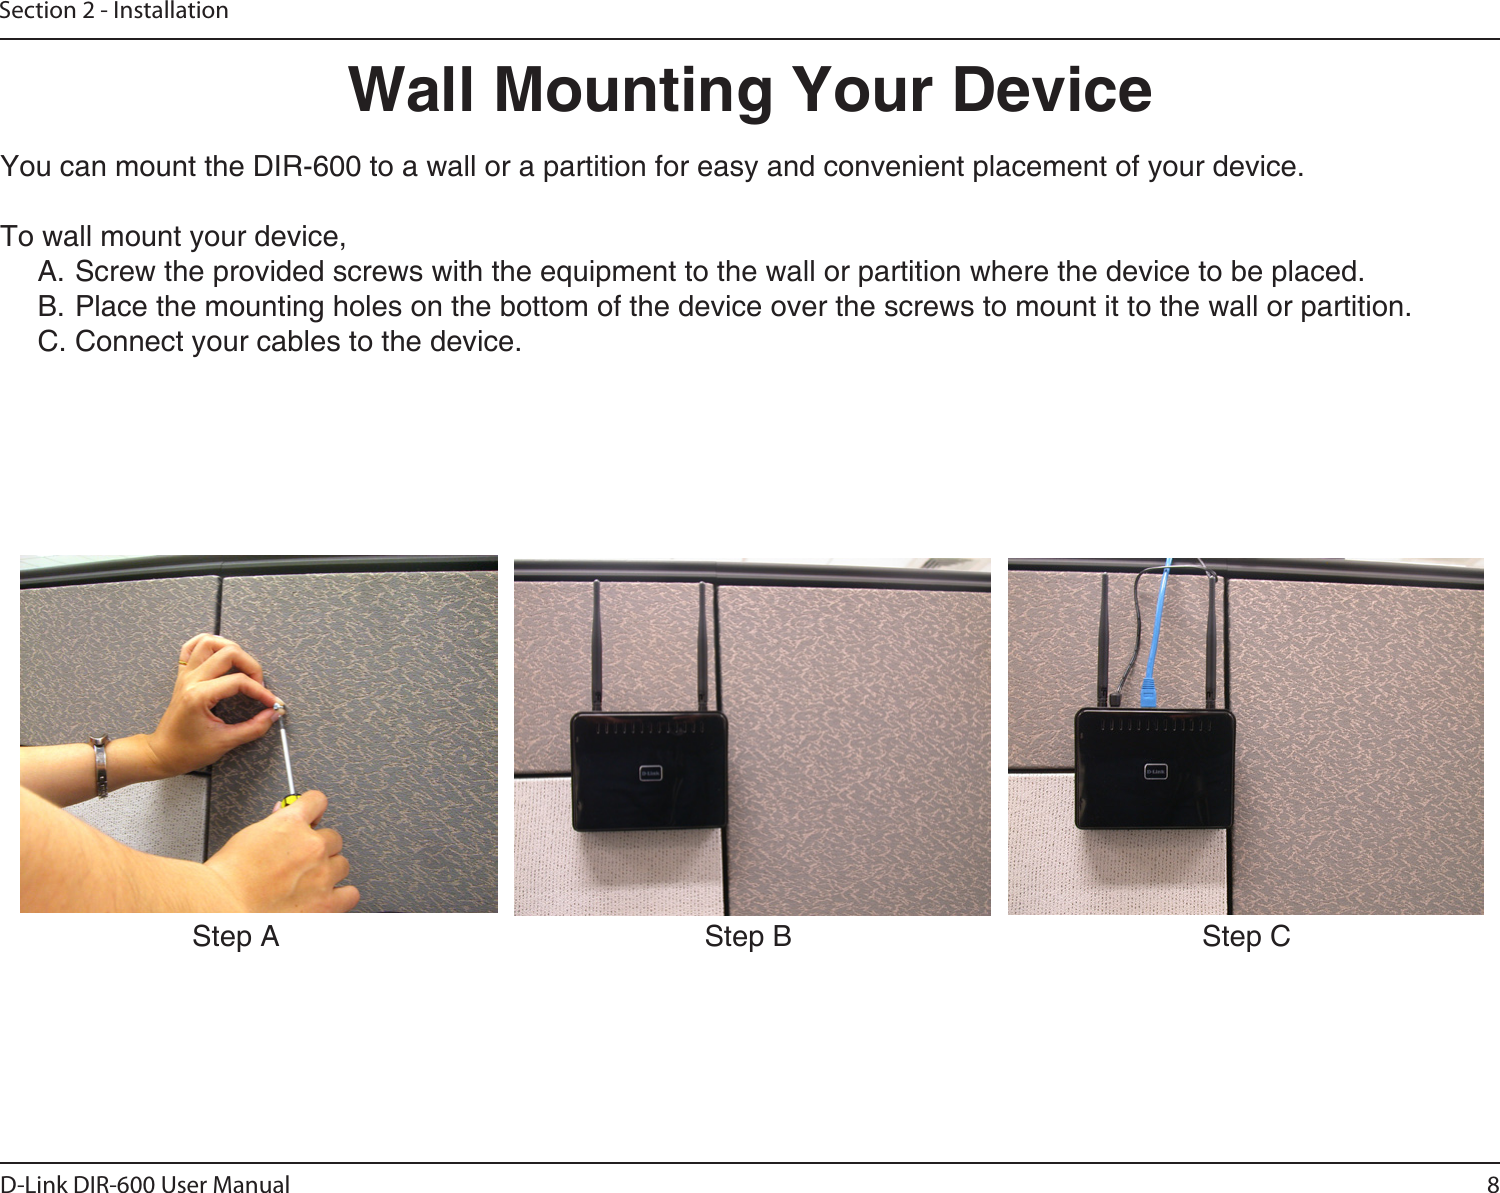 8D-Link DIR-600 User ManualSection 2 - InstallationWall Mounting Your DeviceYou can mount the DIR-600 to a wall or a partition for easy and convenient placement of your device.To wall mount your device,A. Screw the provided screws with the equipment to the wall or partition where the device to be placed.B. Place the mounting holes on the bottom of the device over the screws to mount it to the wall or partition.C. Connect your cables to the device.Step A Step B Step C